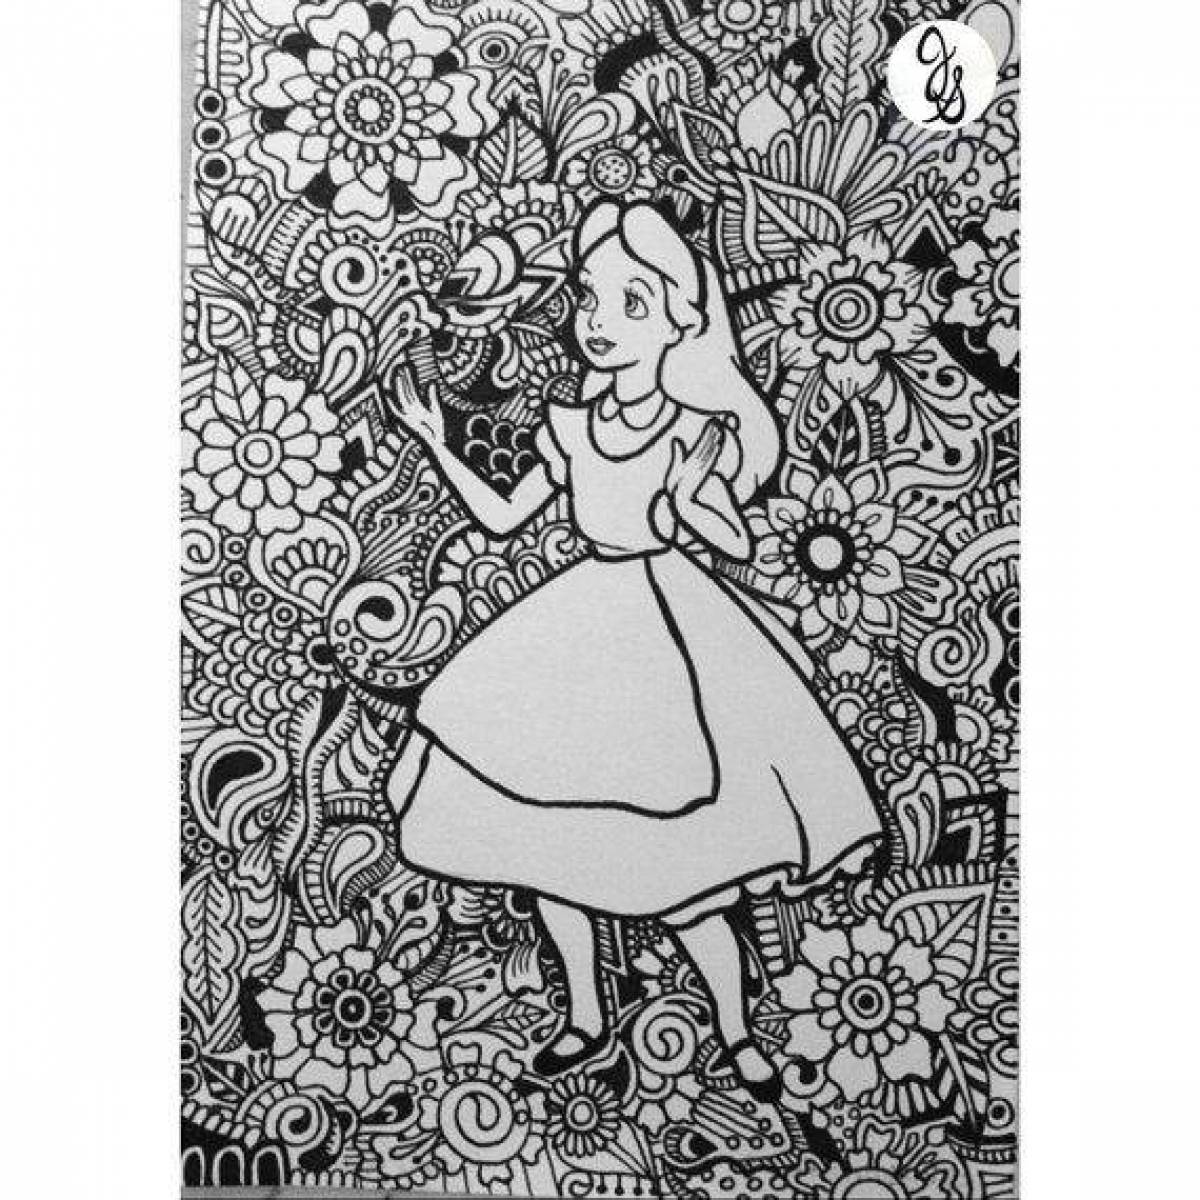 Fairy alice find coloring page